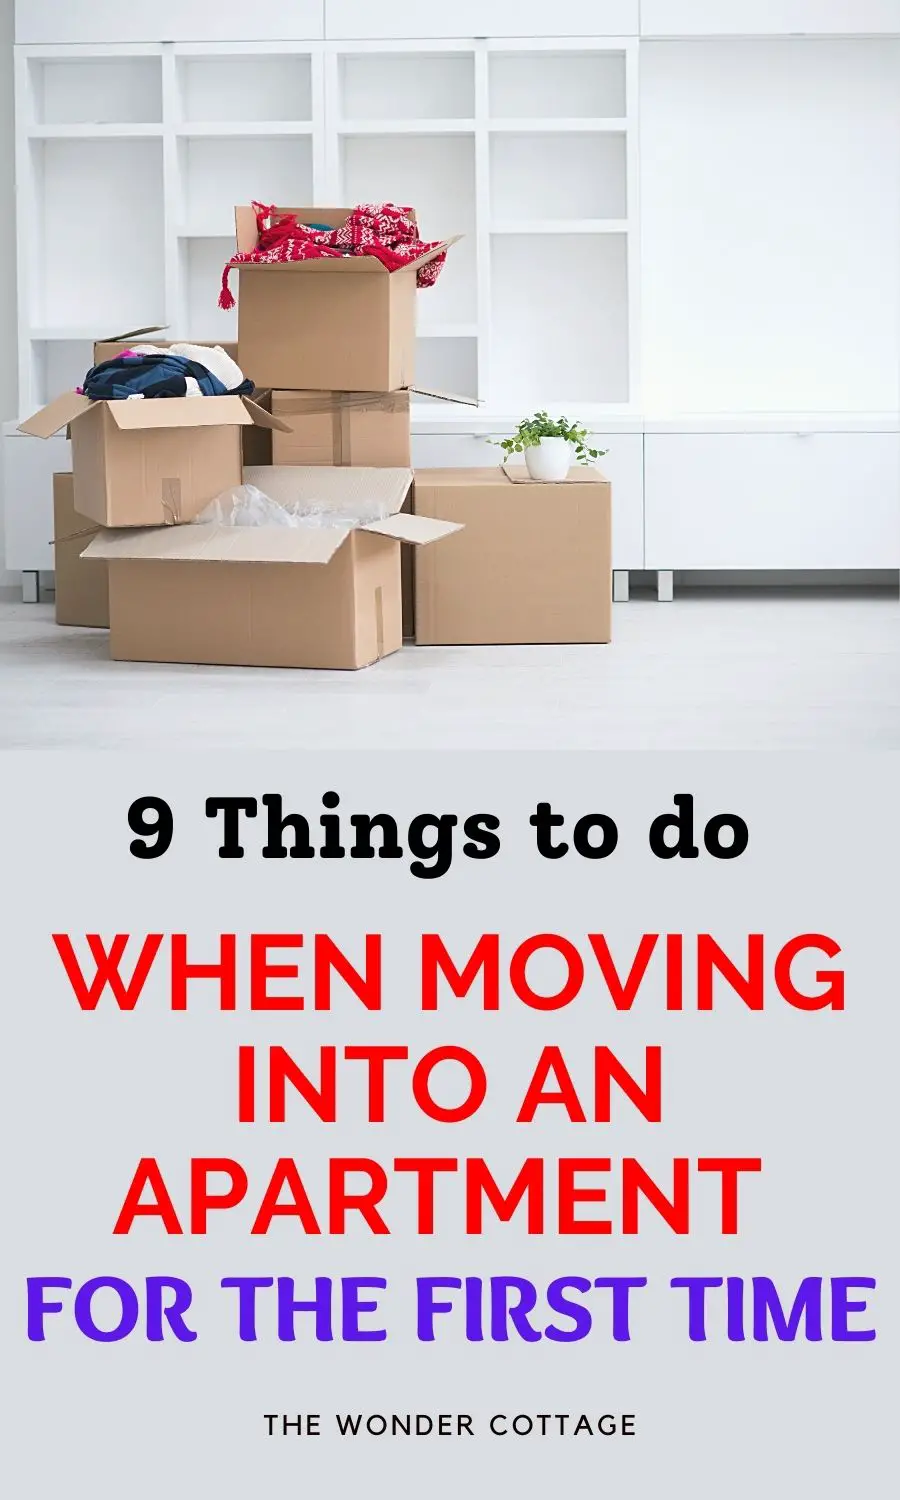 Things to do when moving into an apartment for the first time